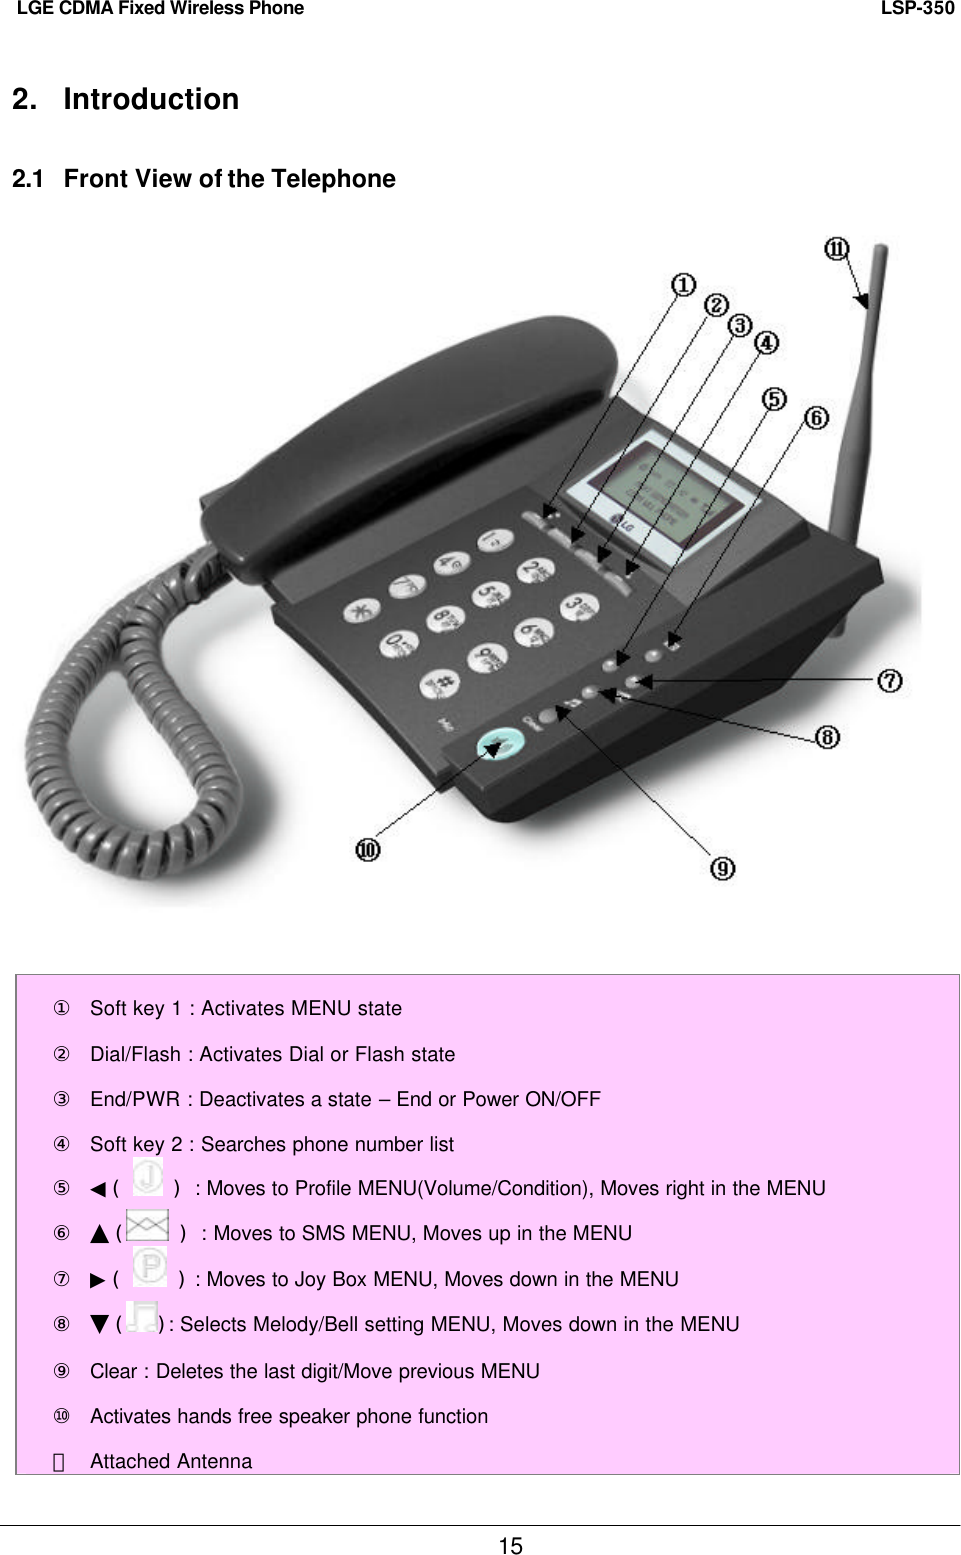   LSP-350 LGE CDMA Fixed Wireless Phone 15 2. Introduction 2.1 Front View of the Telephone    ① Soft key 1 : Activates MENU state ② Dial/Flash : Activates Dial or Flash state ③ End/PWR : Deactivates a state – End or Power ON/OFF ④ Soft key 2 : Searches phone number list ⑤ ◀(   ) : Moves to Profile MENU(Volume/Condition), Moves right in the MENU ⑥ ▲(  ) : Moves to SMS MENU, Moves up in the MENU ⑦ ▶(   ) : Moves to Joy Box MENU, Moves down in the MENU ⑧ ▼( ): Selects Melody/Bell setting MENU, Moves down in the MENU ⑨ Clear : Deletes the last digit/Move previous MENU ⑩ Activates hands free speaker phone function ⑪ Attached Antenna 